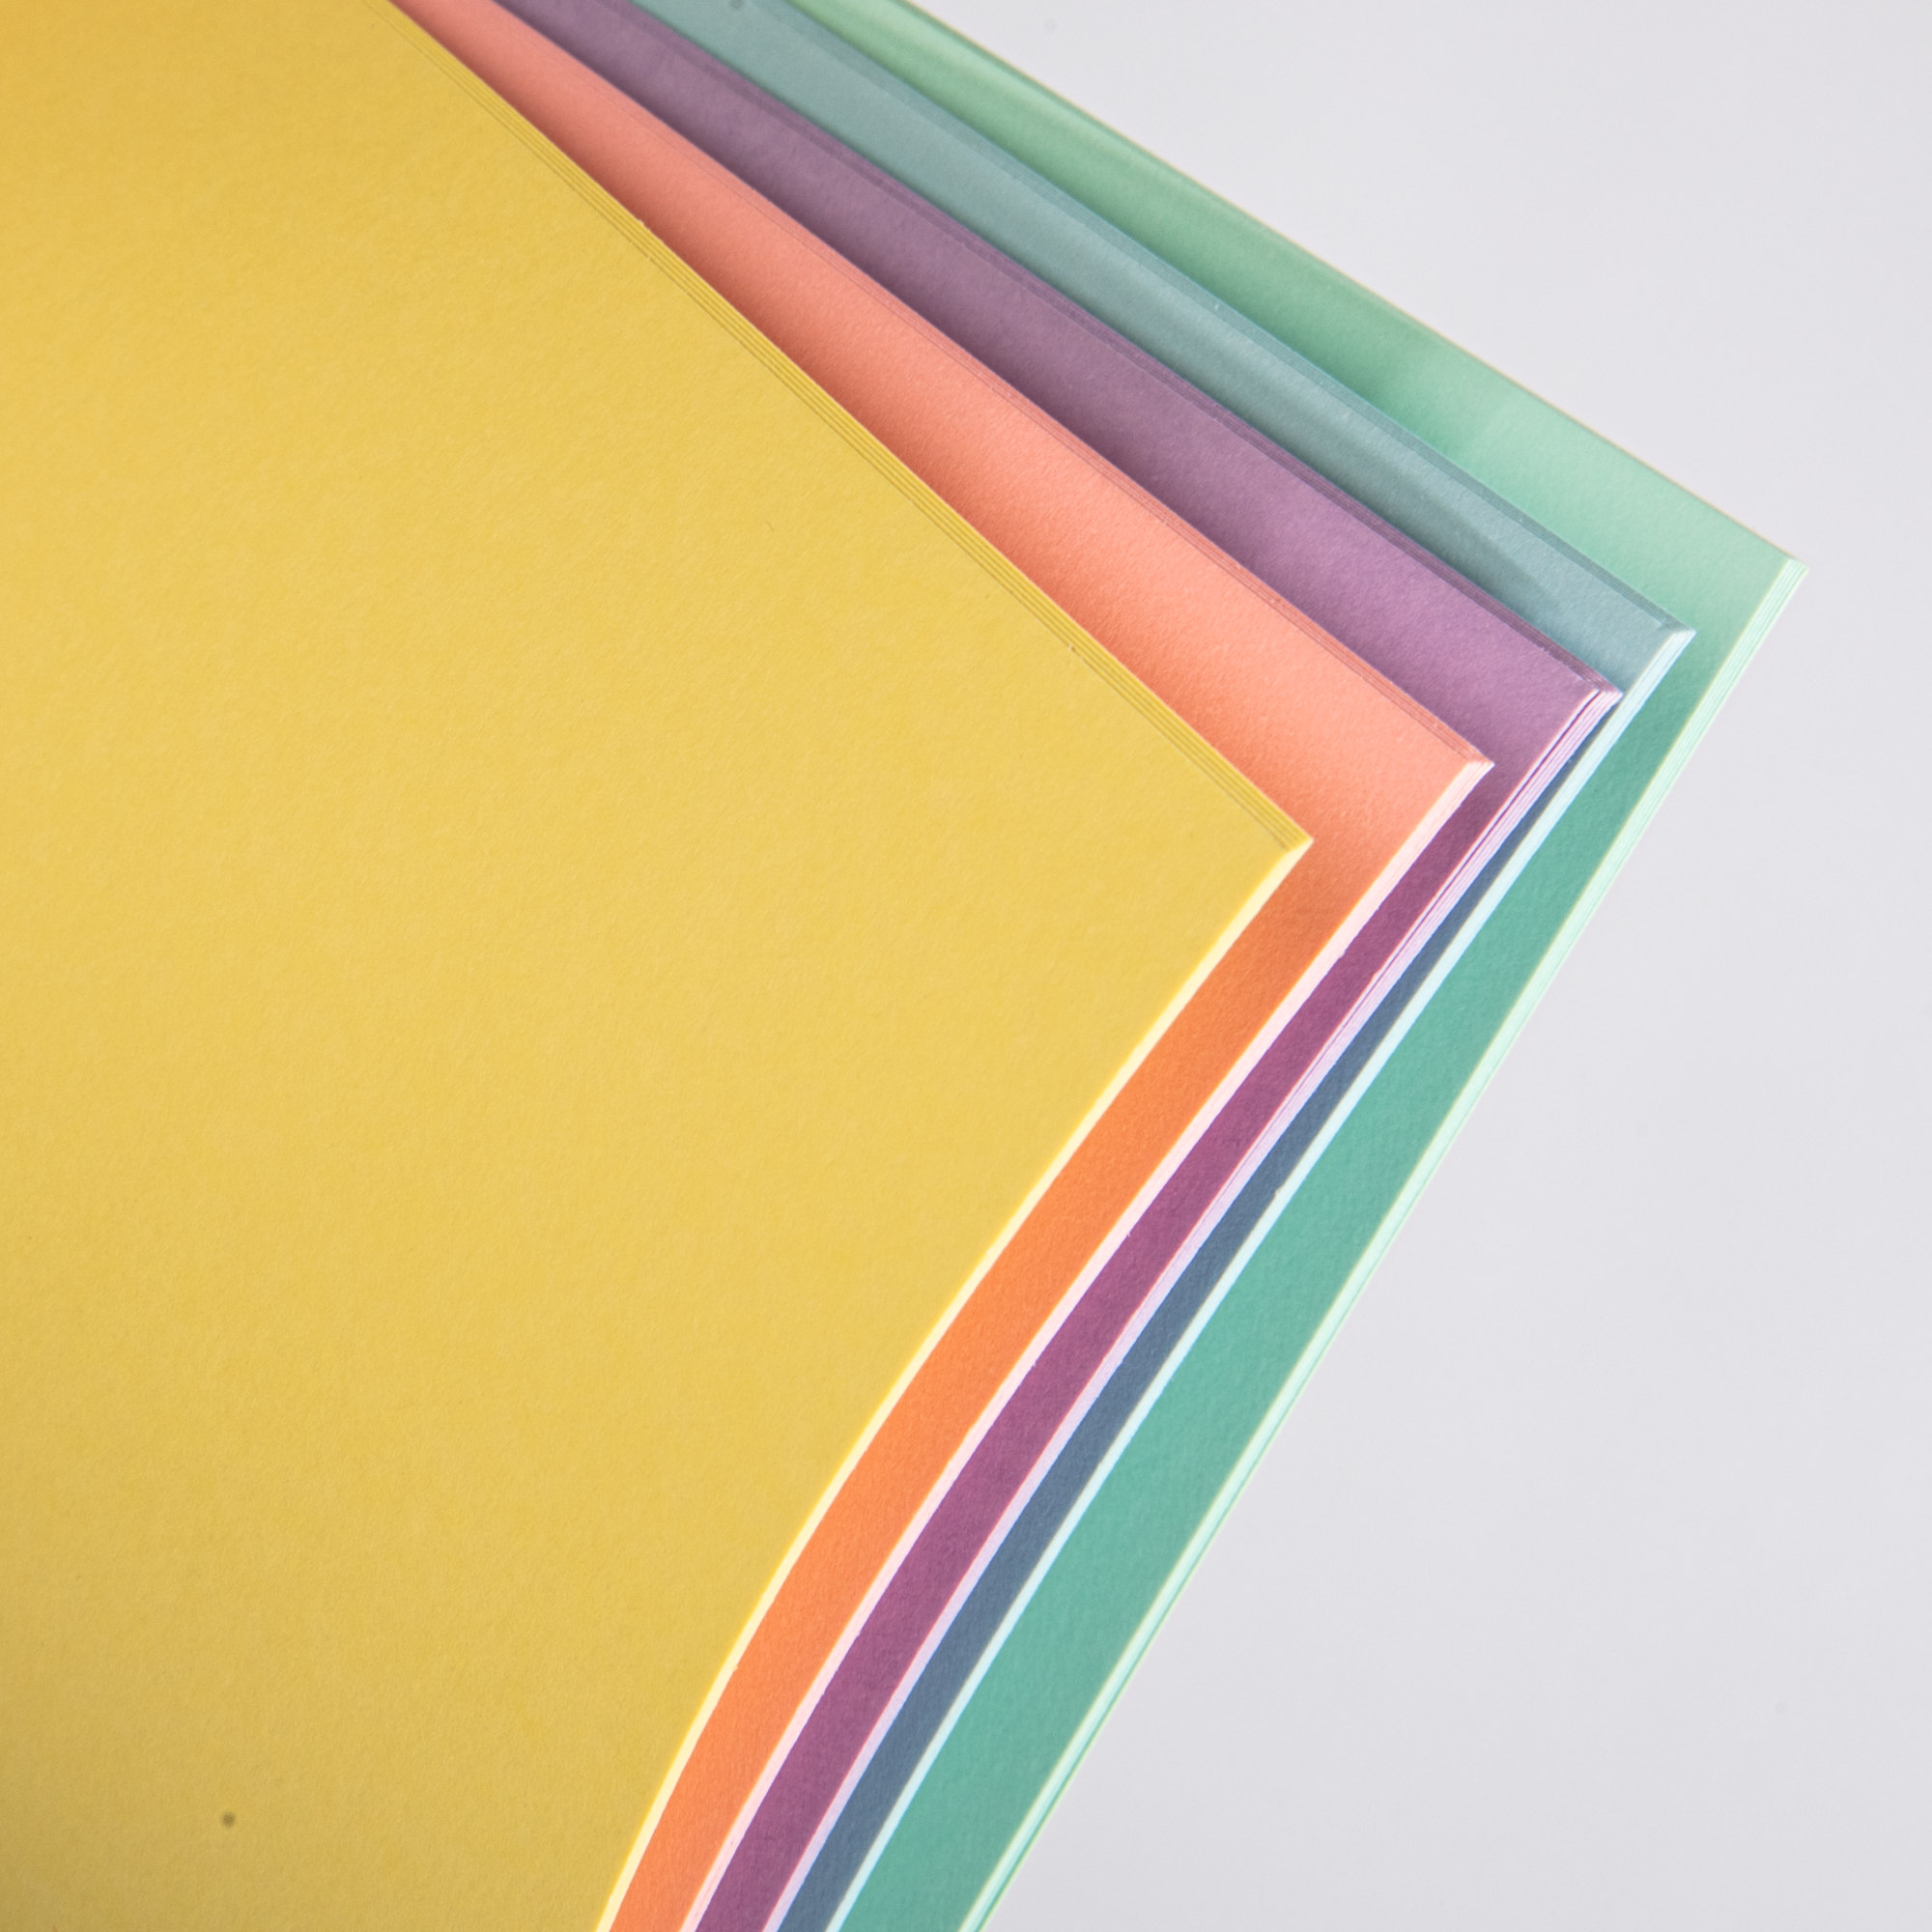 The Paper Mill Coloured Core Smooth Cardstock 180gsm 16.5x11.4cm (6.5 x  4.5) 50 Sheets Pastels 737B Find the Latest Trends and Innovators